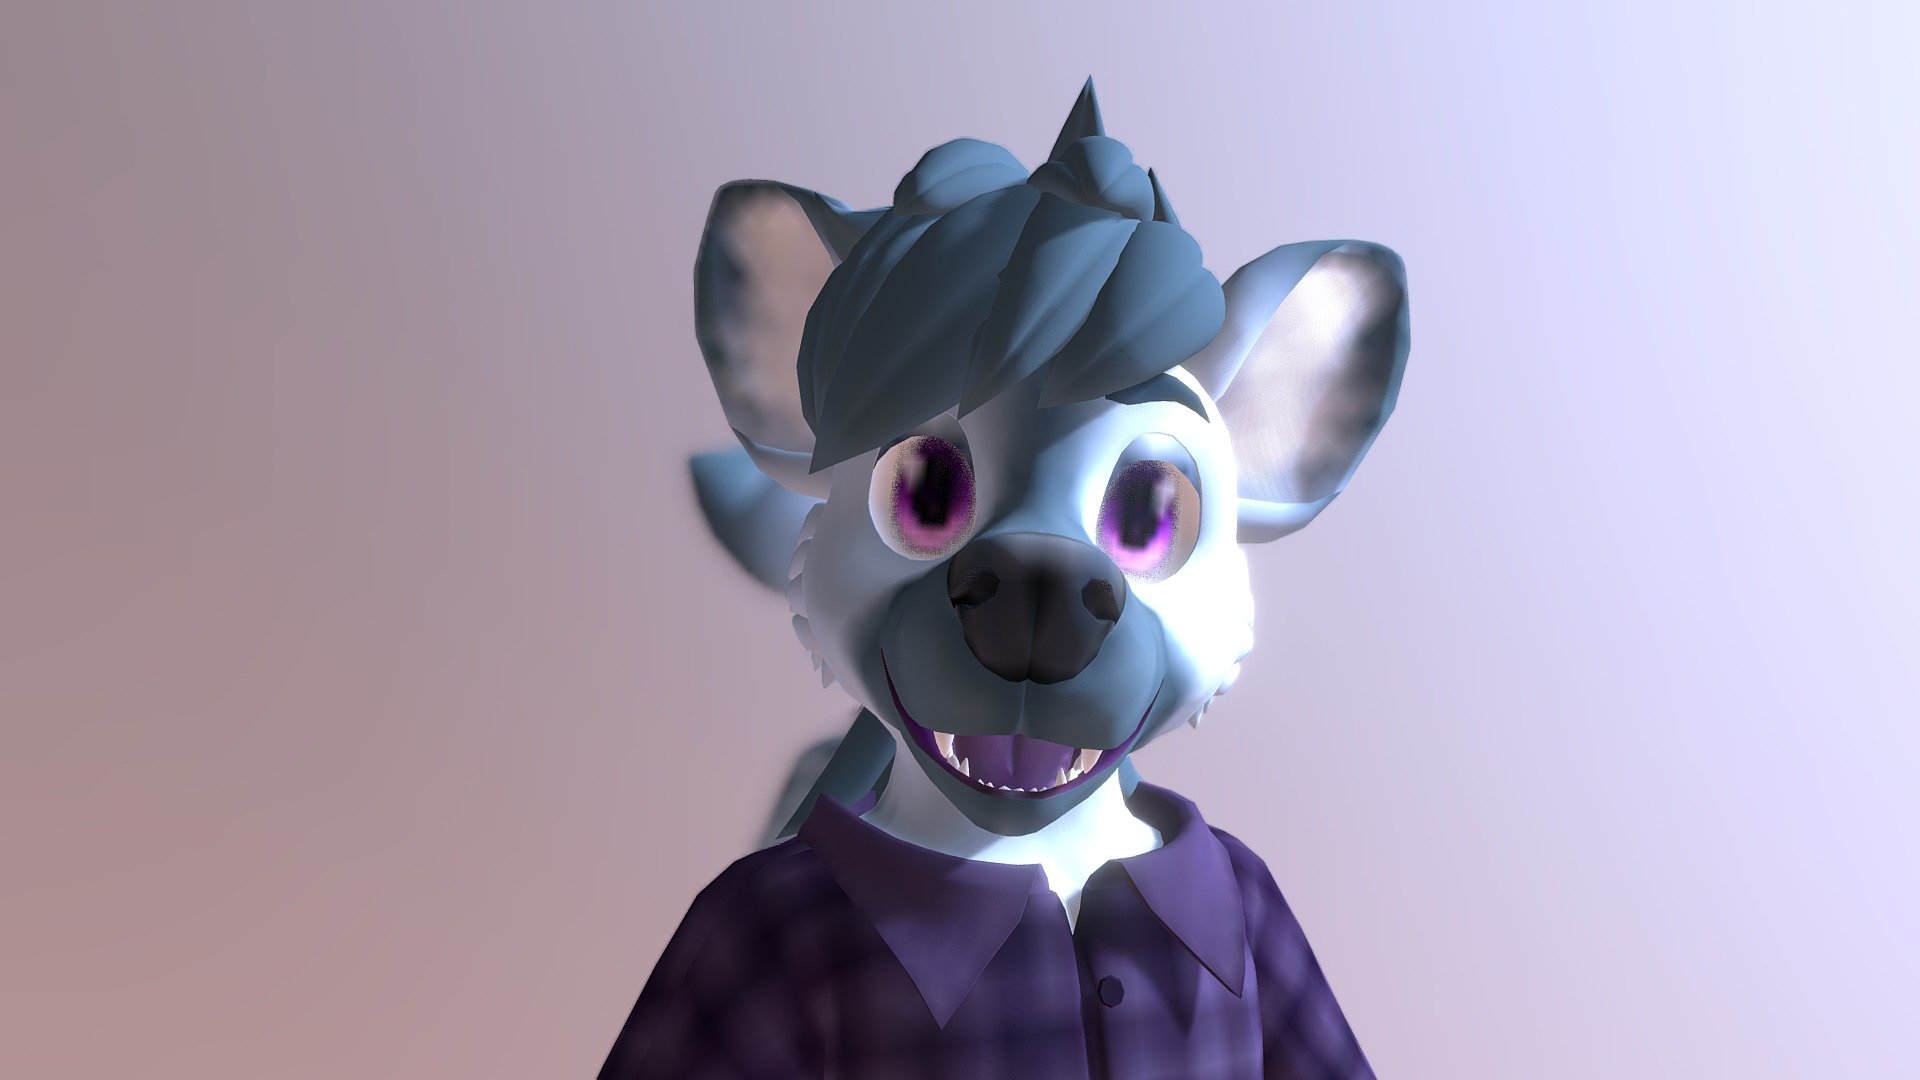 Avatar commission for Moofy, this one inclused an outfit too so I thought I'd post both together!

Made to be used as an avatar in VRChat 3d model